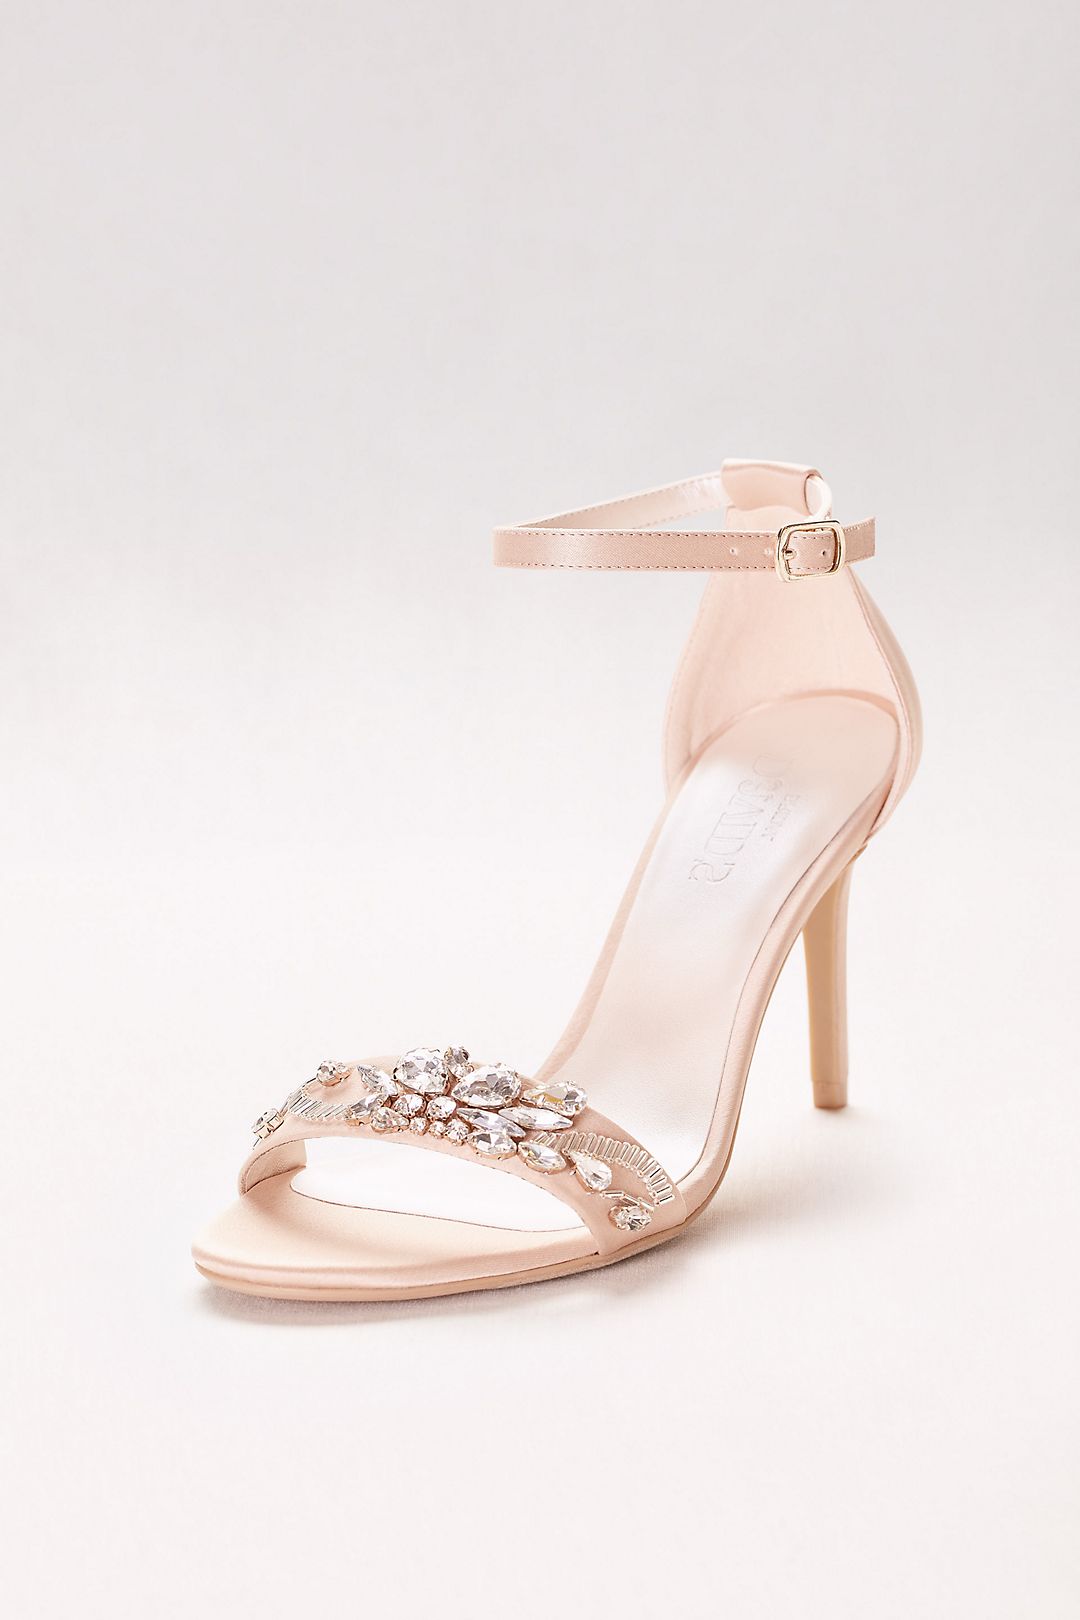 Jeweled Strappy Heels  Image 1